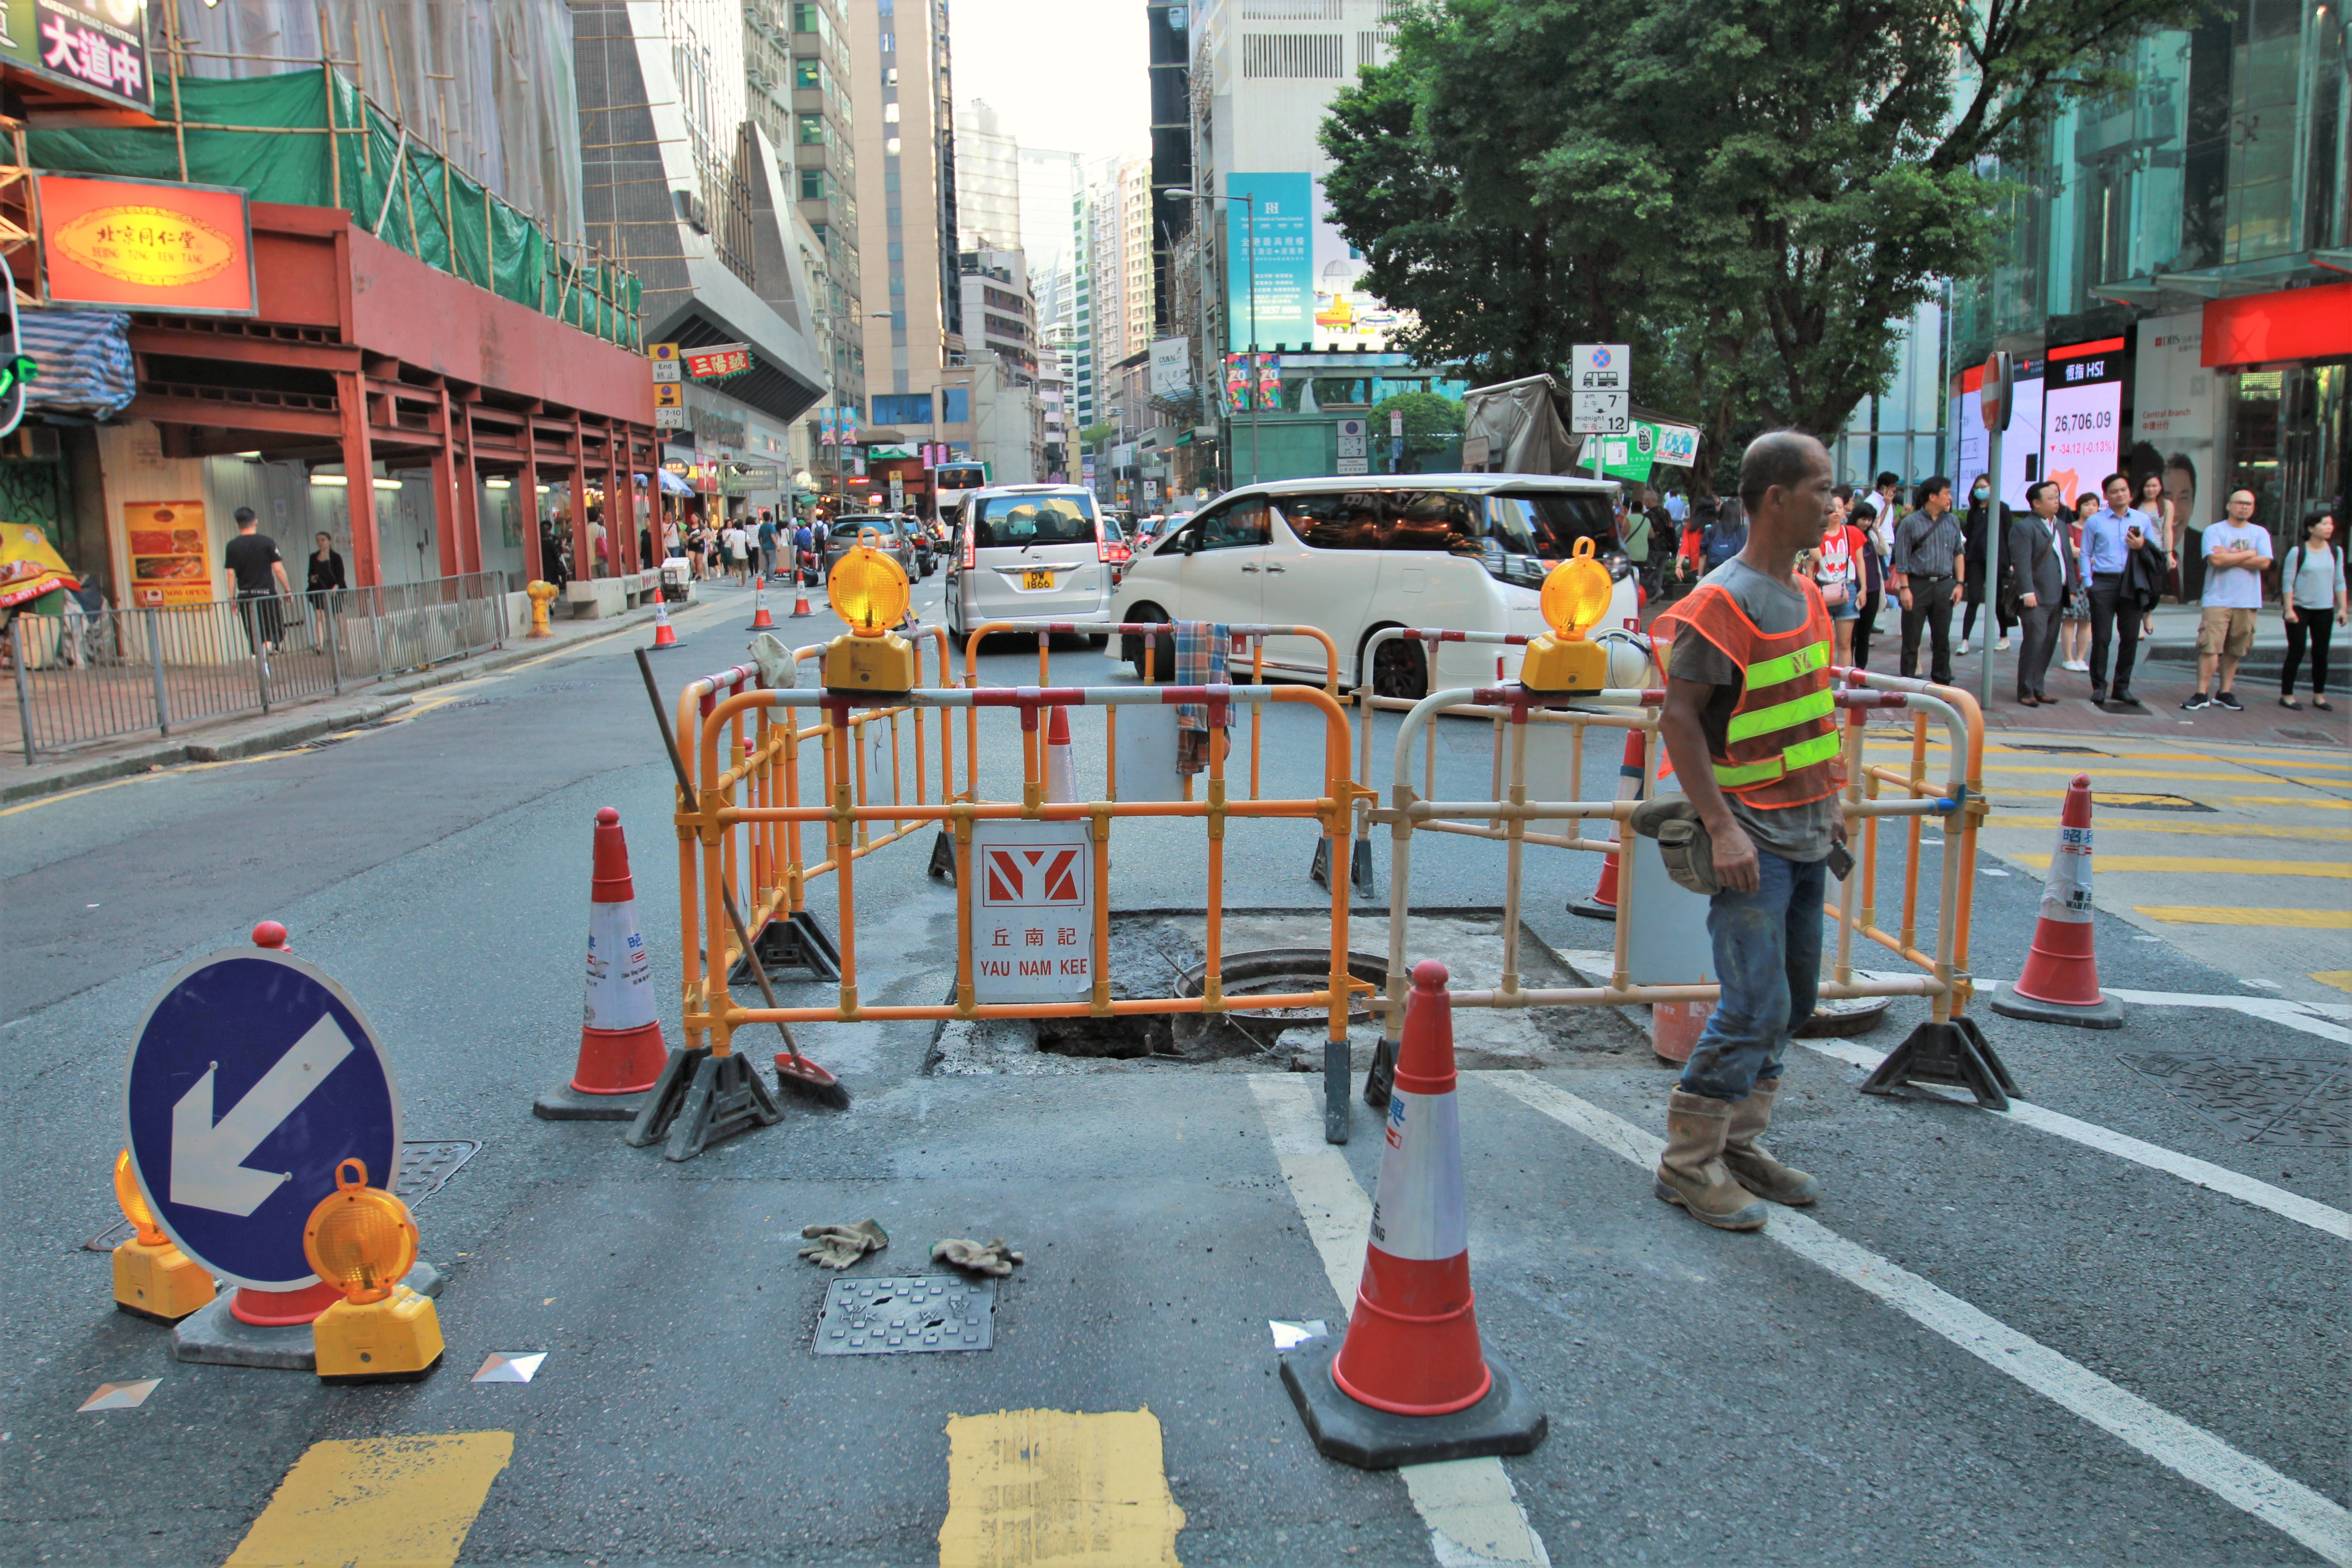 A construction worker stands by the hole on Queen’s Road Central, one of the busiest thoroughfares in Hong Kong. Photo: Cecilia Wong/Coconuts Media